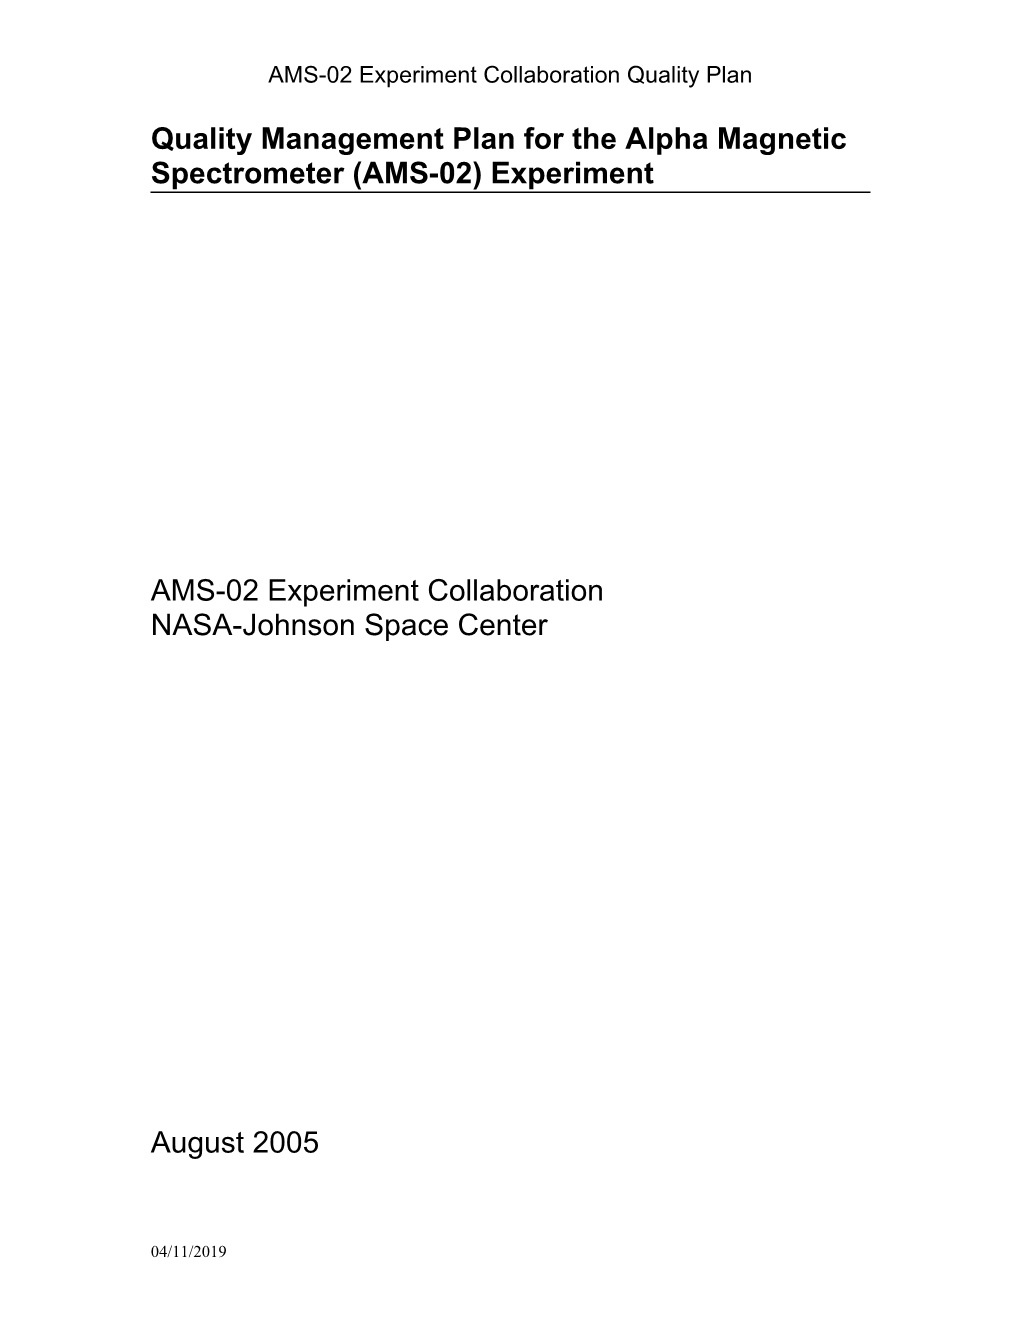 Quality Management Plan for the Alpha Magnetic Spectrometer (AMS-02) Experiment